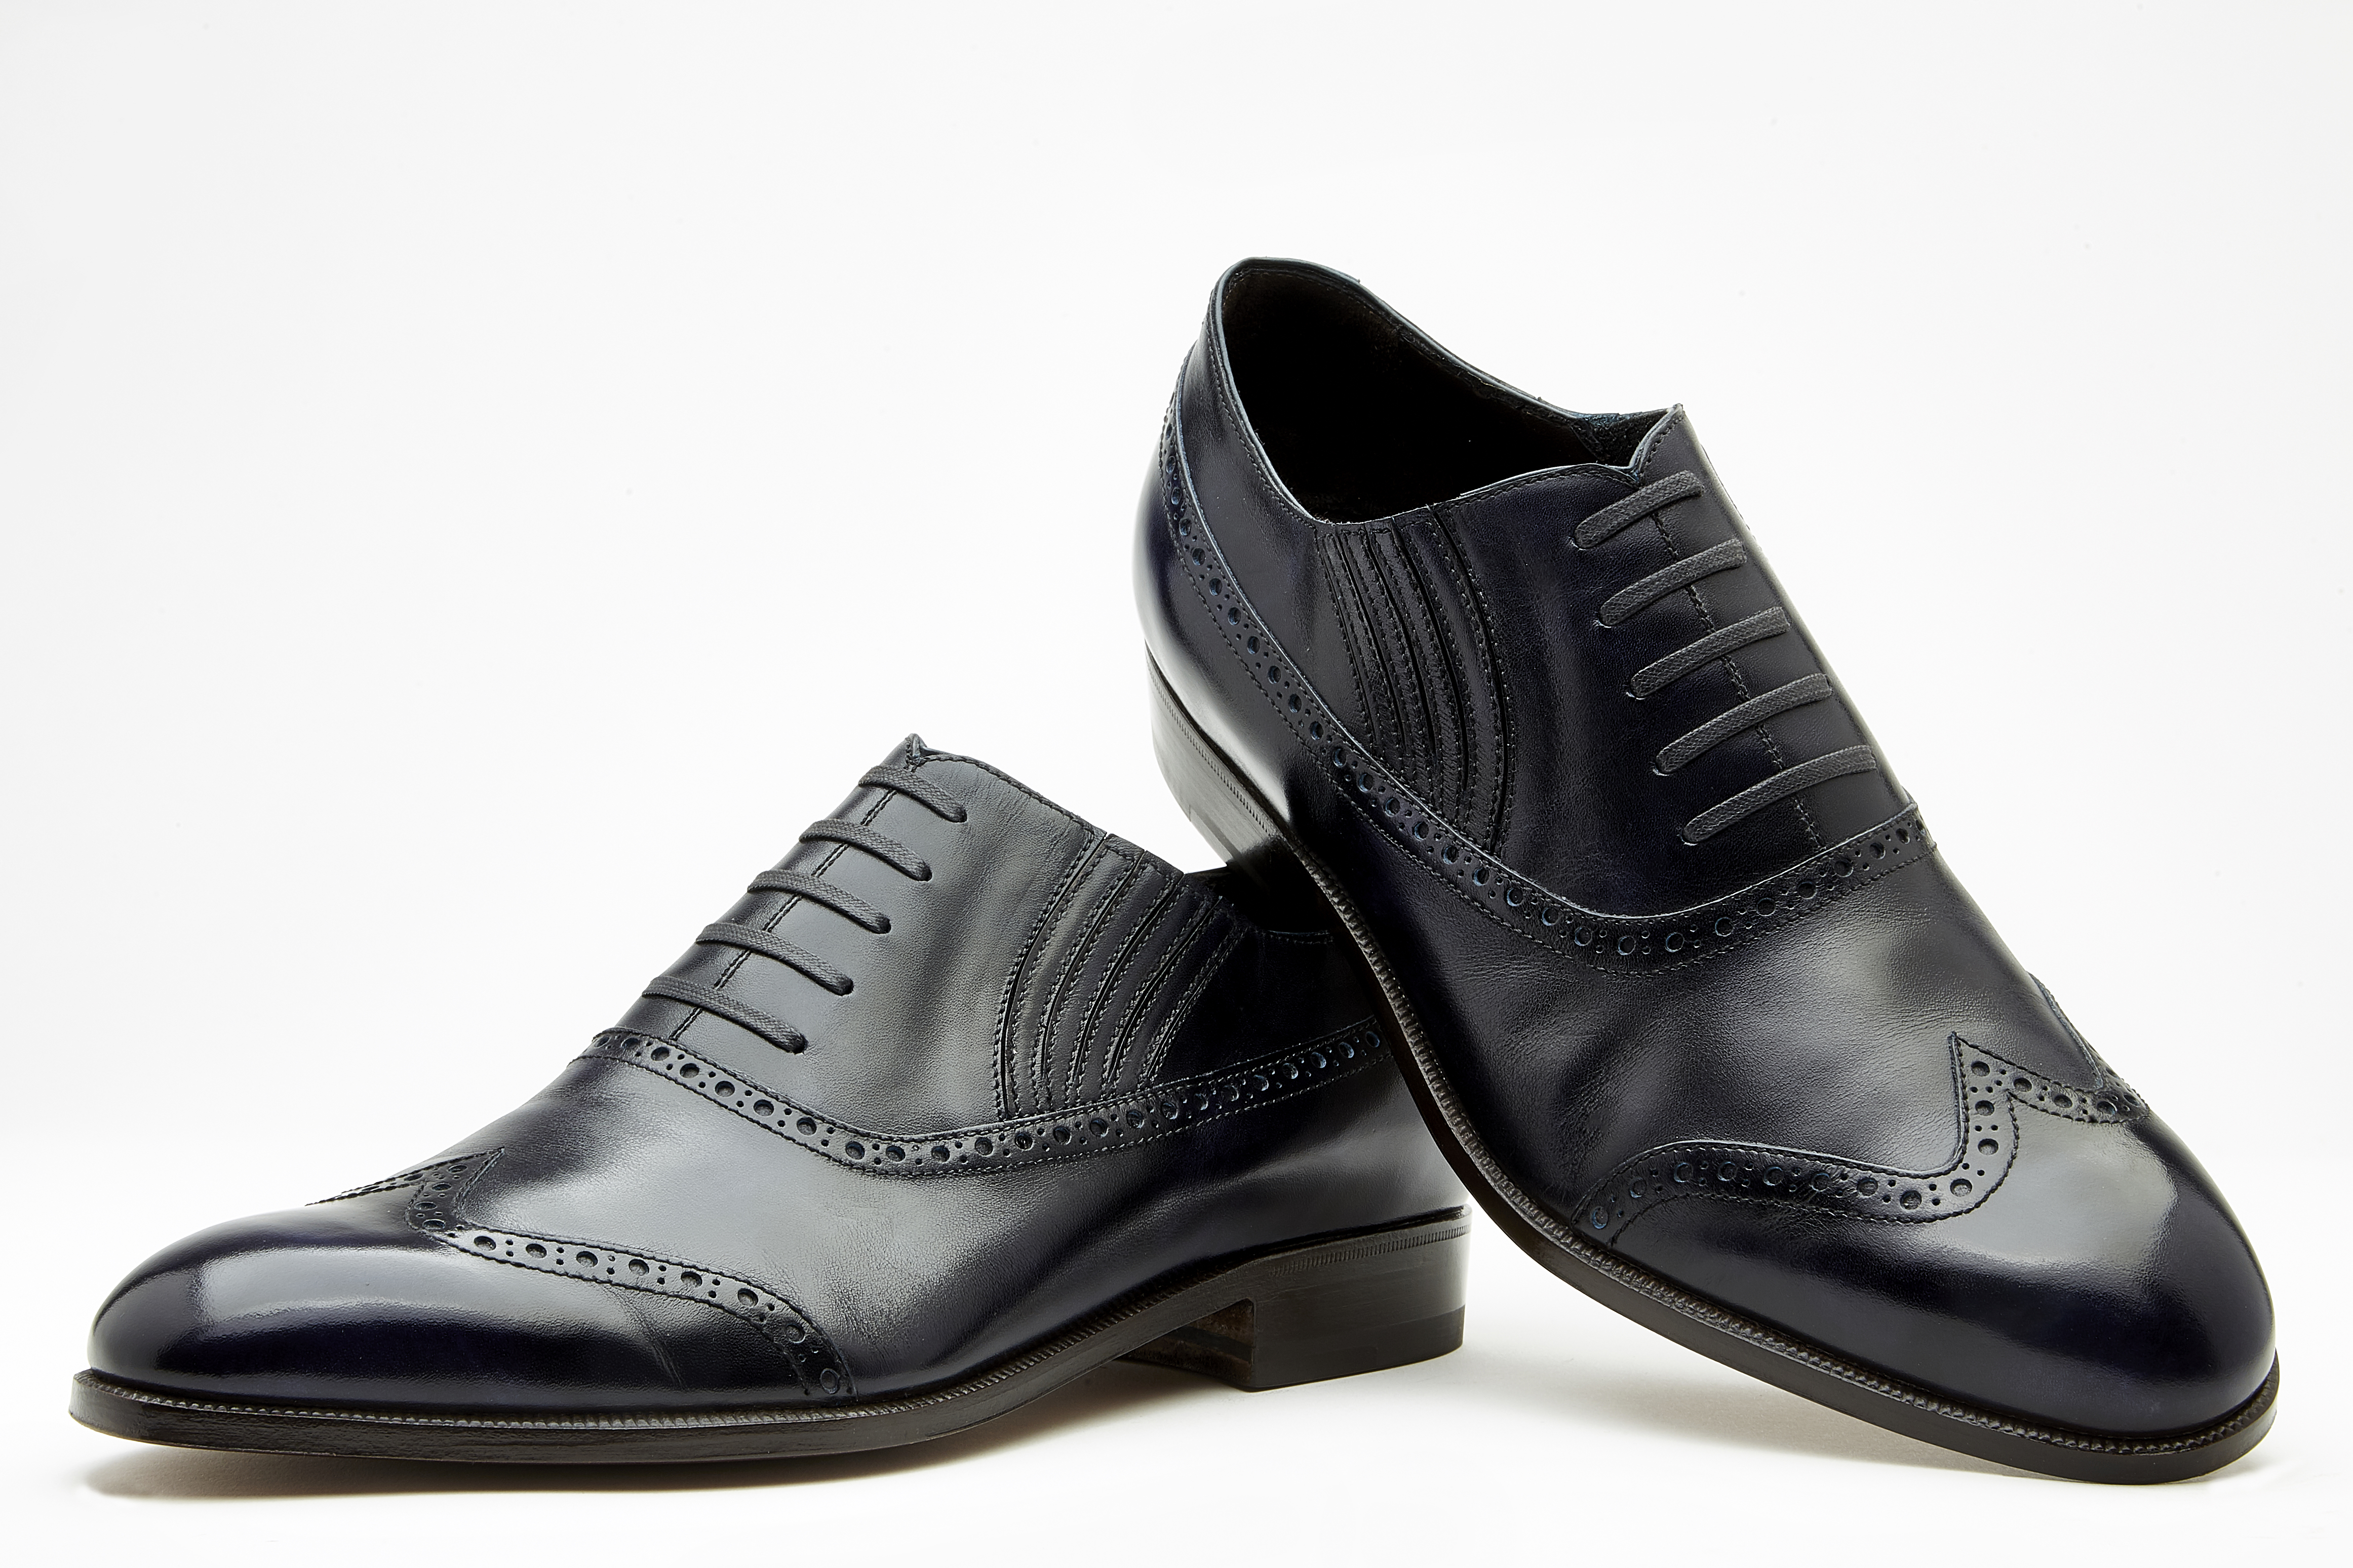 Bespoke shoes for men and women